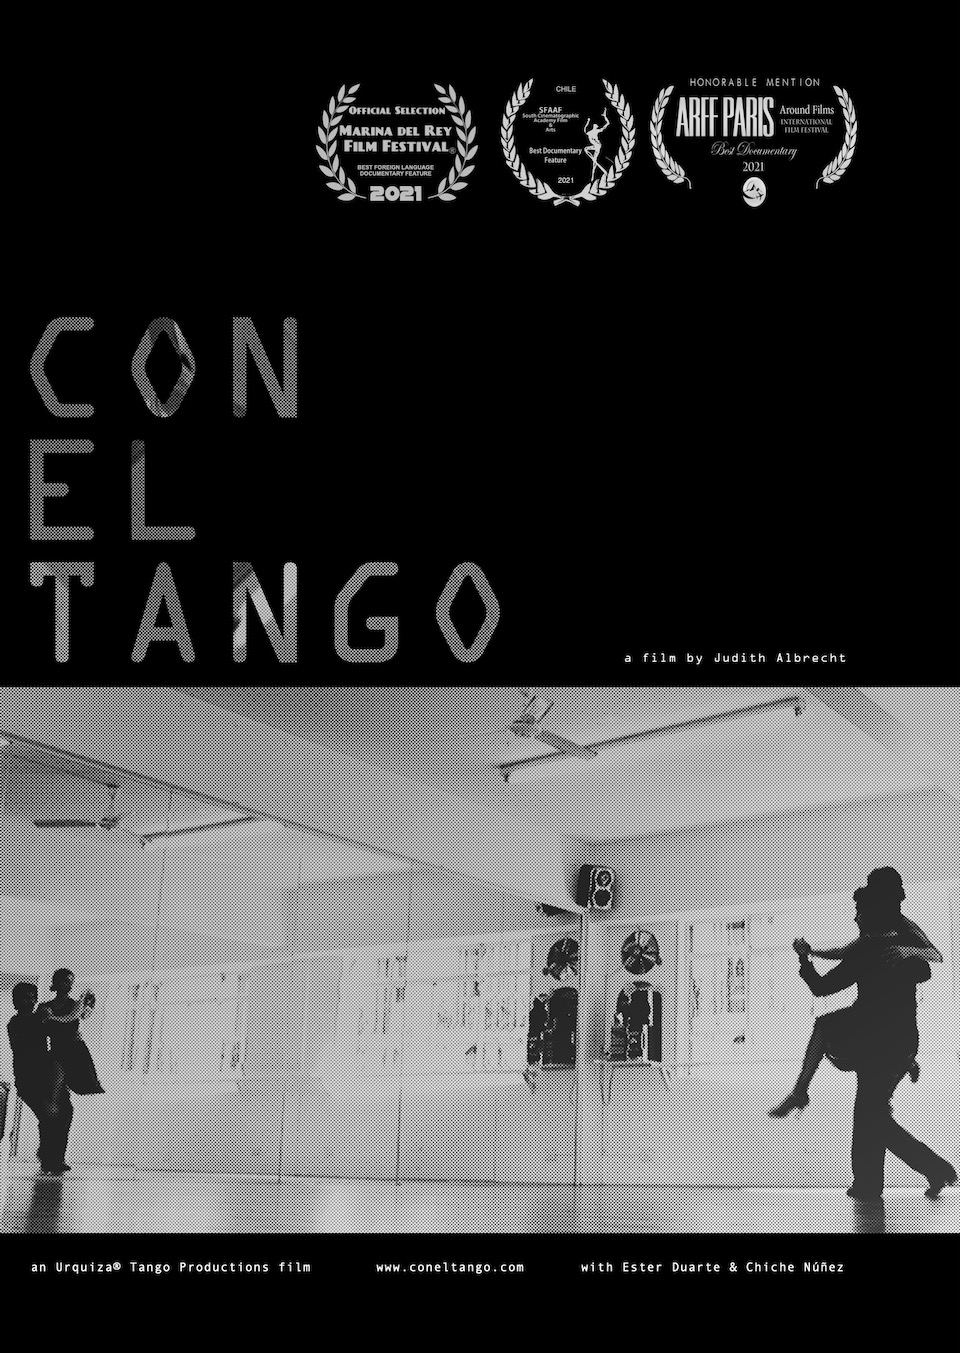 Con El Tango Poster with Laurels - Documentary about Urquiza Tango Argentino with Chiche Nunez, Ester Duarte and Jose Brahemcha